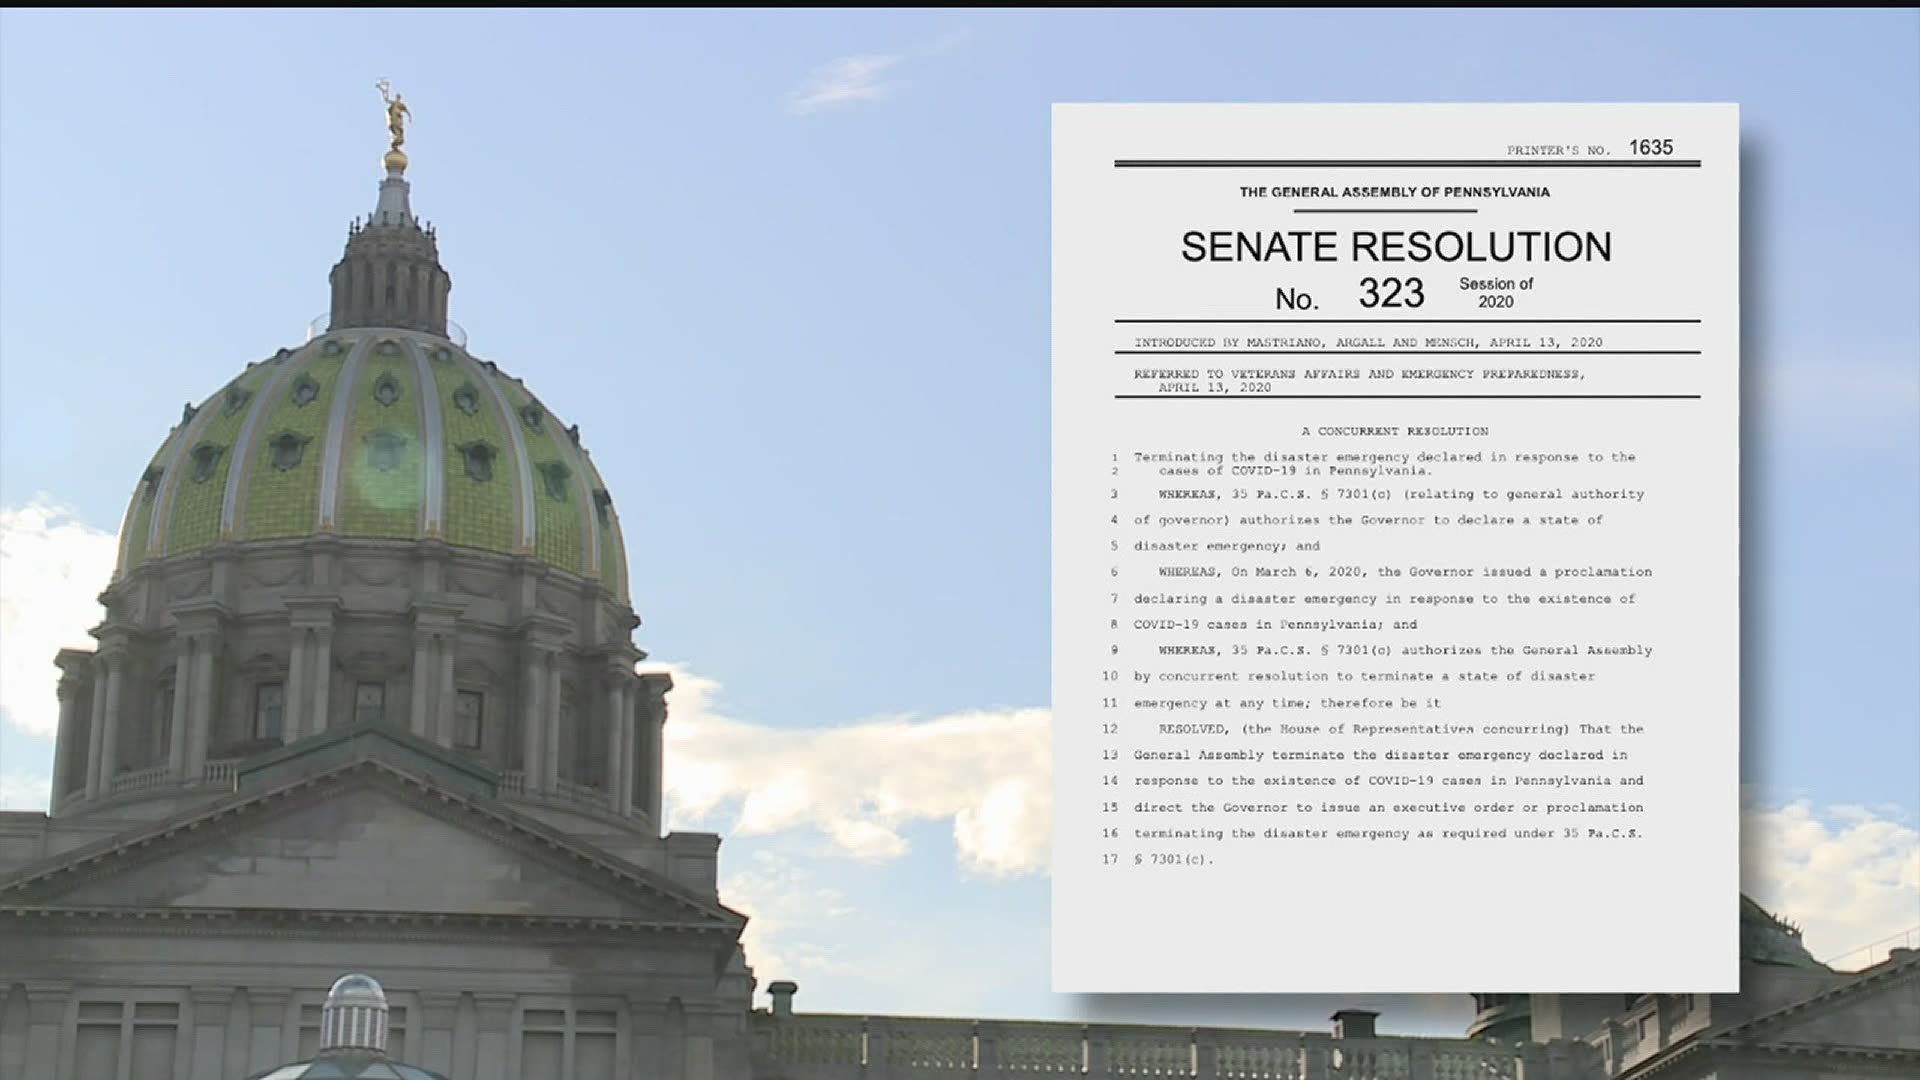 Governor Wolf says, he will disapprove the resolution. The General Assembly would need a 2/3 majority to override the governor's disapproval